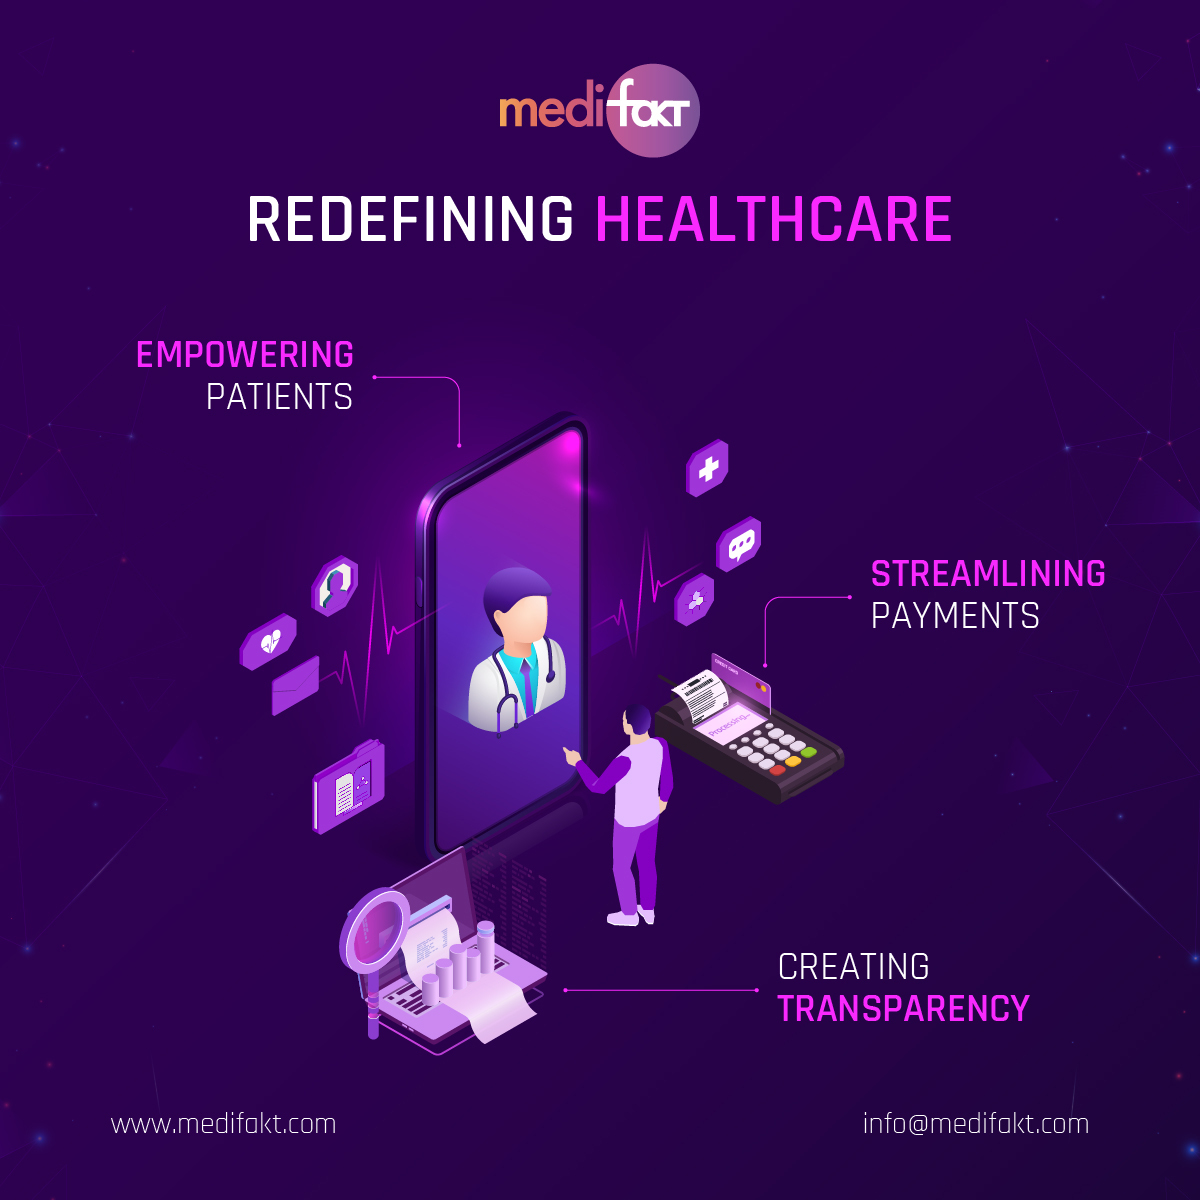 Medifakt is a #blockchain-driven #healthcare ecosystem that offers a revolutionary #paymentmethod using #tokens on the #blockchain. 🌟 Our platform aims to be a comprehensive #healthrecords #repository and an #AI-powered #virtualassistant, creating a #decentralized #healthcare